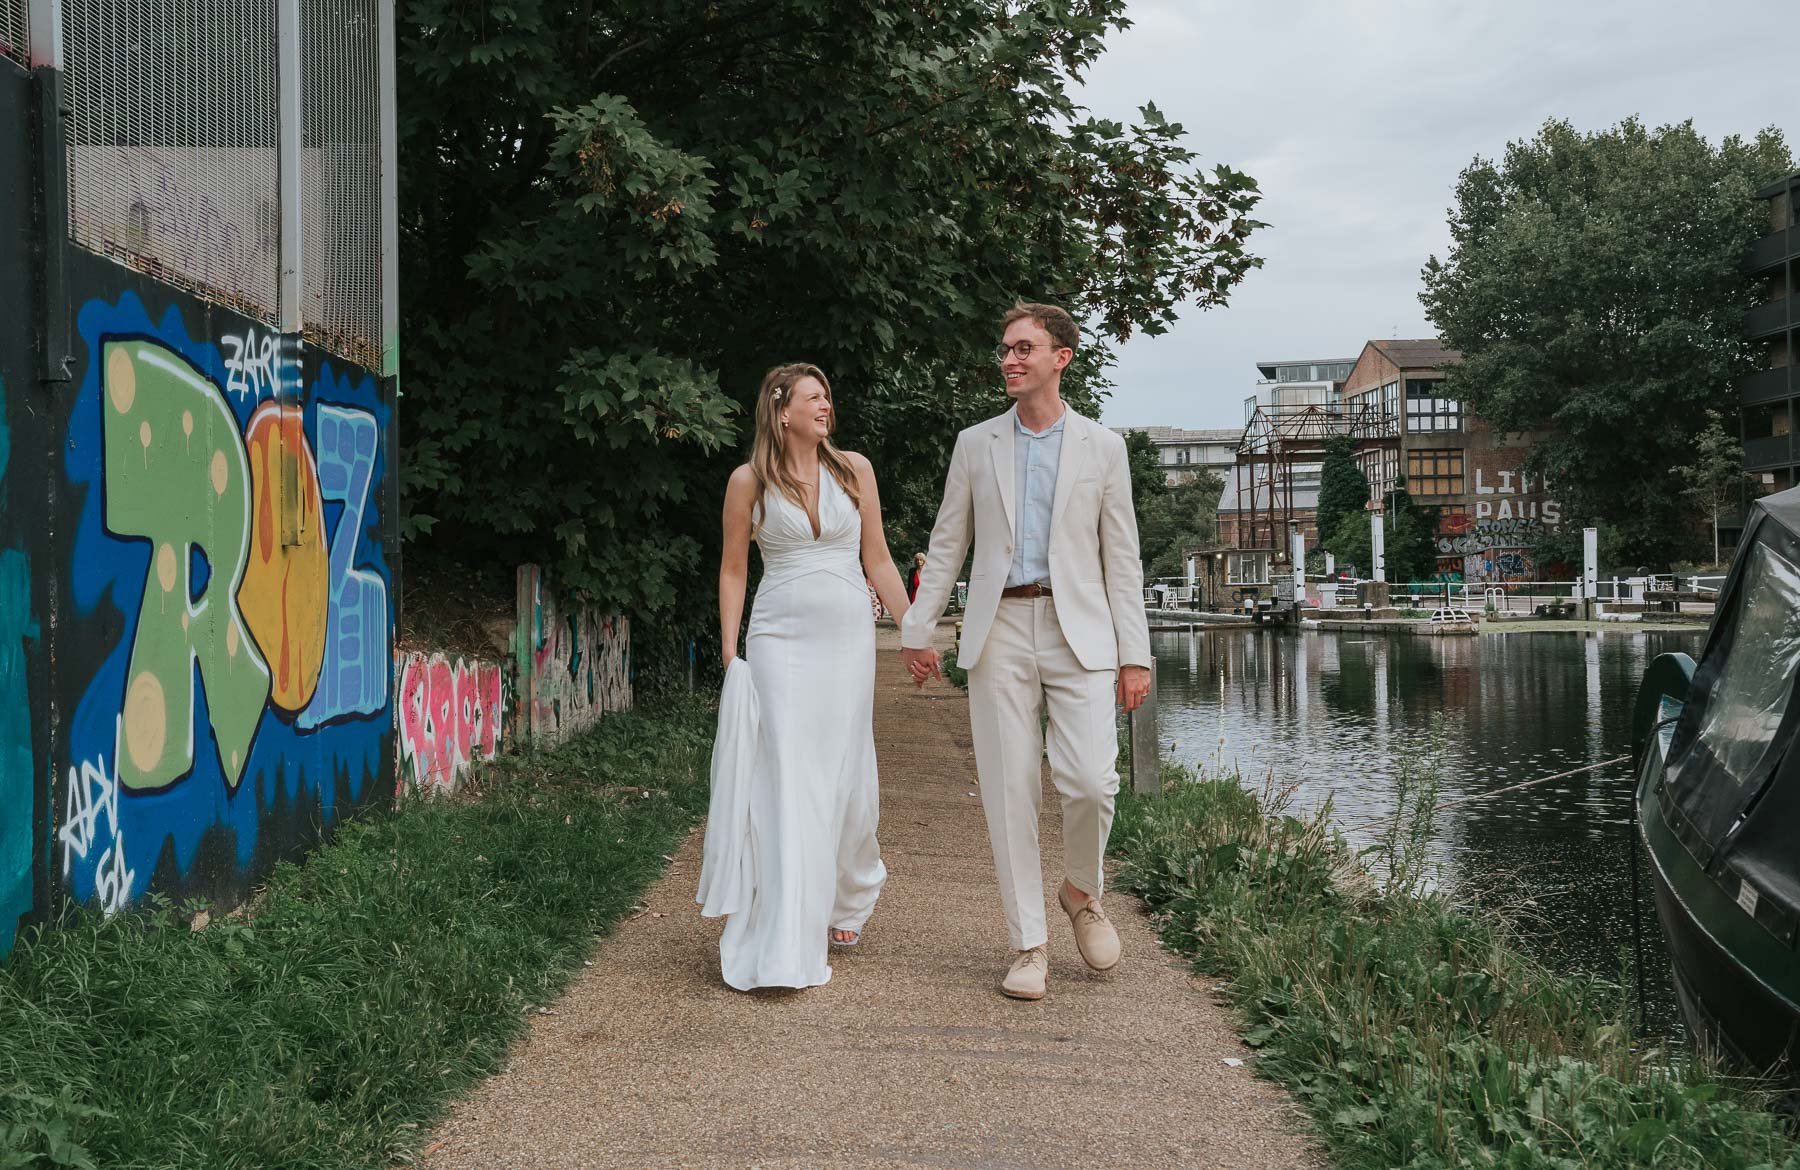  A post-wedding stroll in Hackney Wick by the canal. 